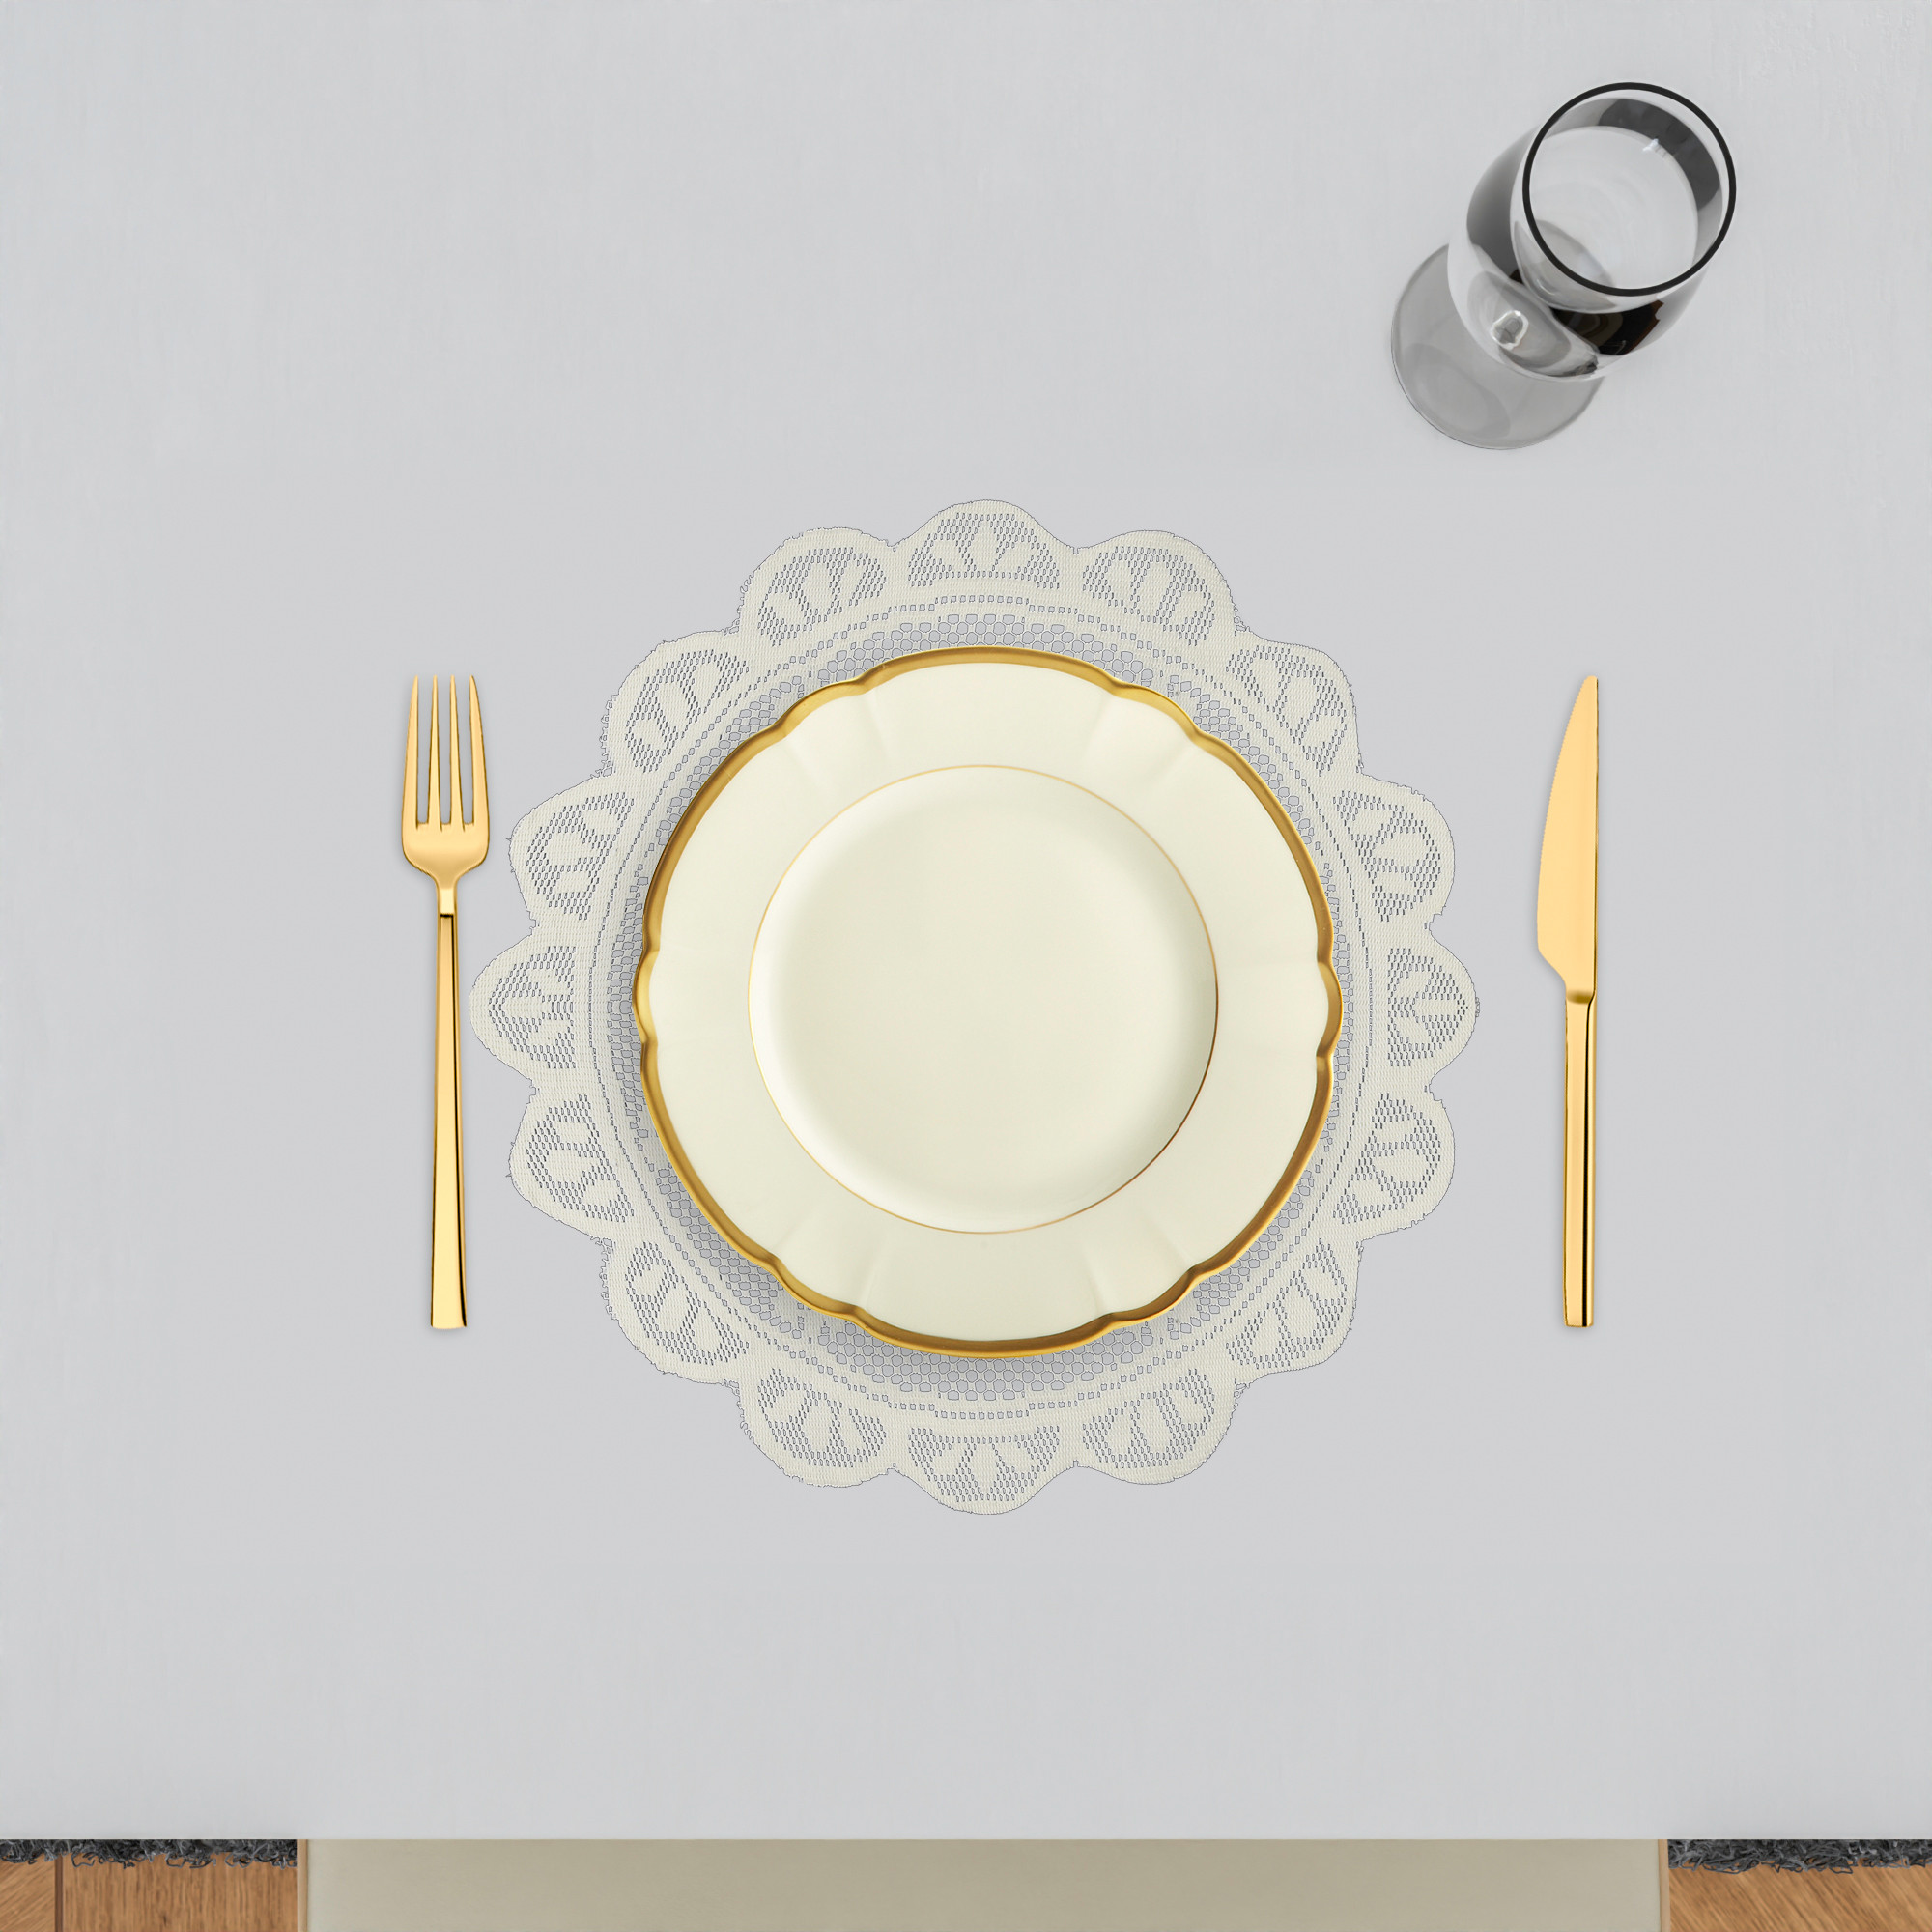 Kuber Industries Placemat | Dining Table Placemat | Center Table Mats | Round Plain Net Placemat Set | Side Table Placemats for Hotel-Home Décor | 20 Inch |Light Cream